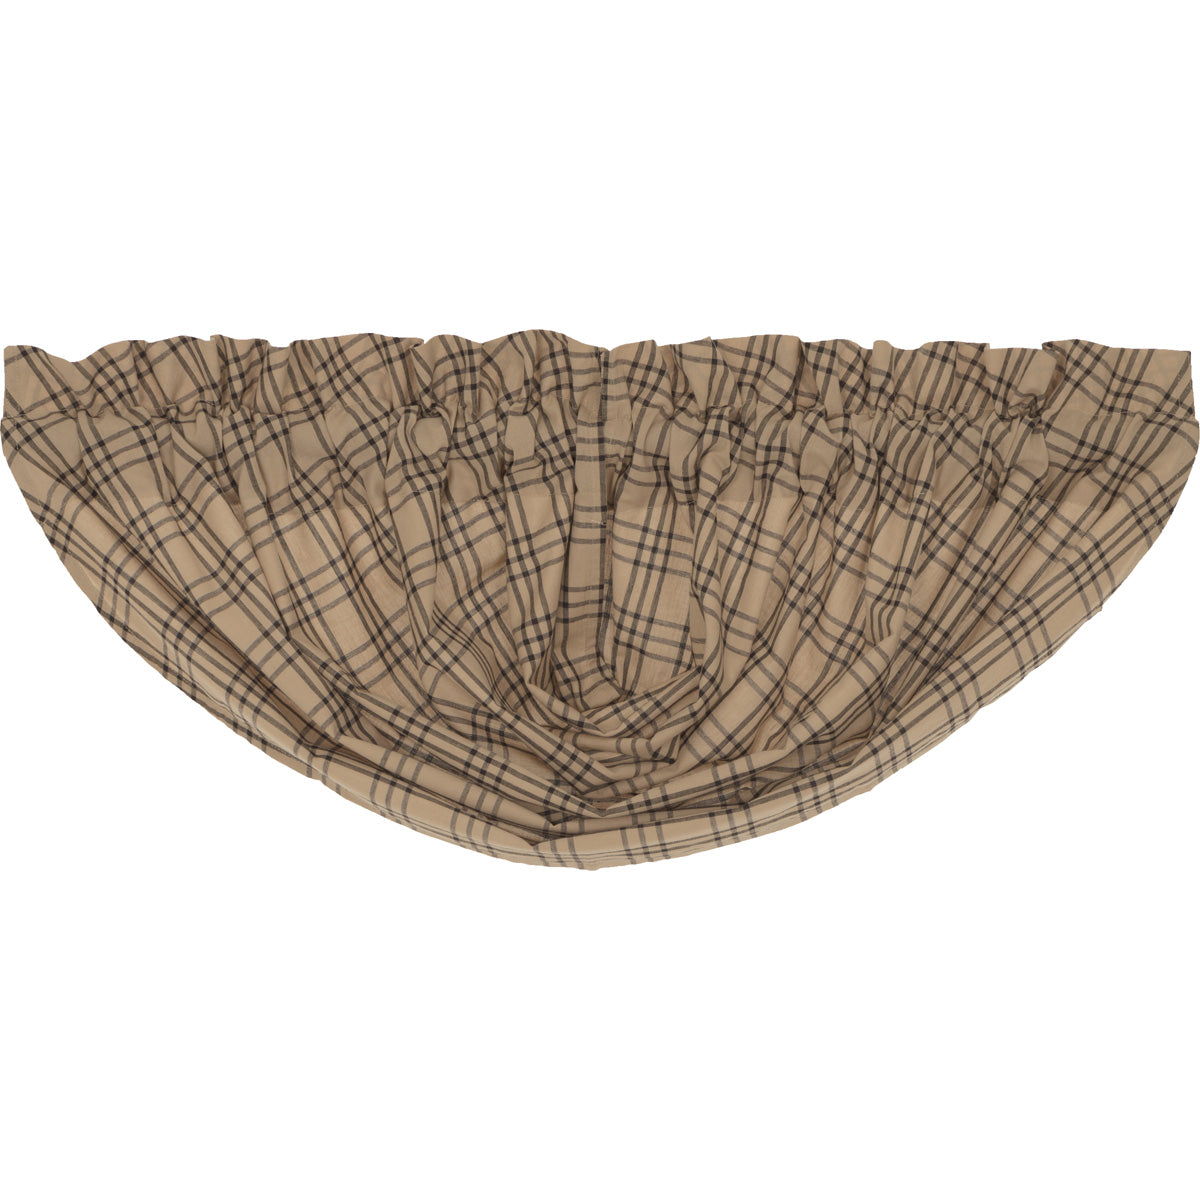 April & Olive Sawyer Mill Charcoal Plaid Balloon Valance 15x60 By VHC Brands